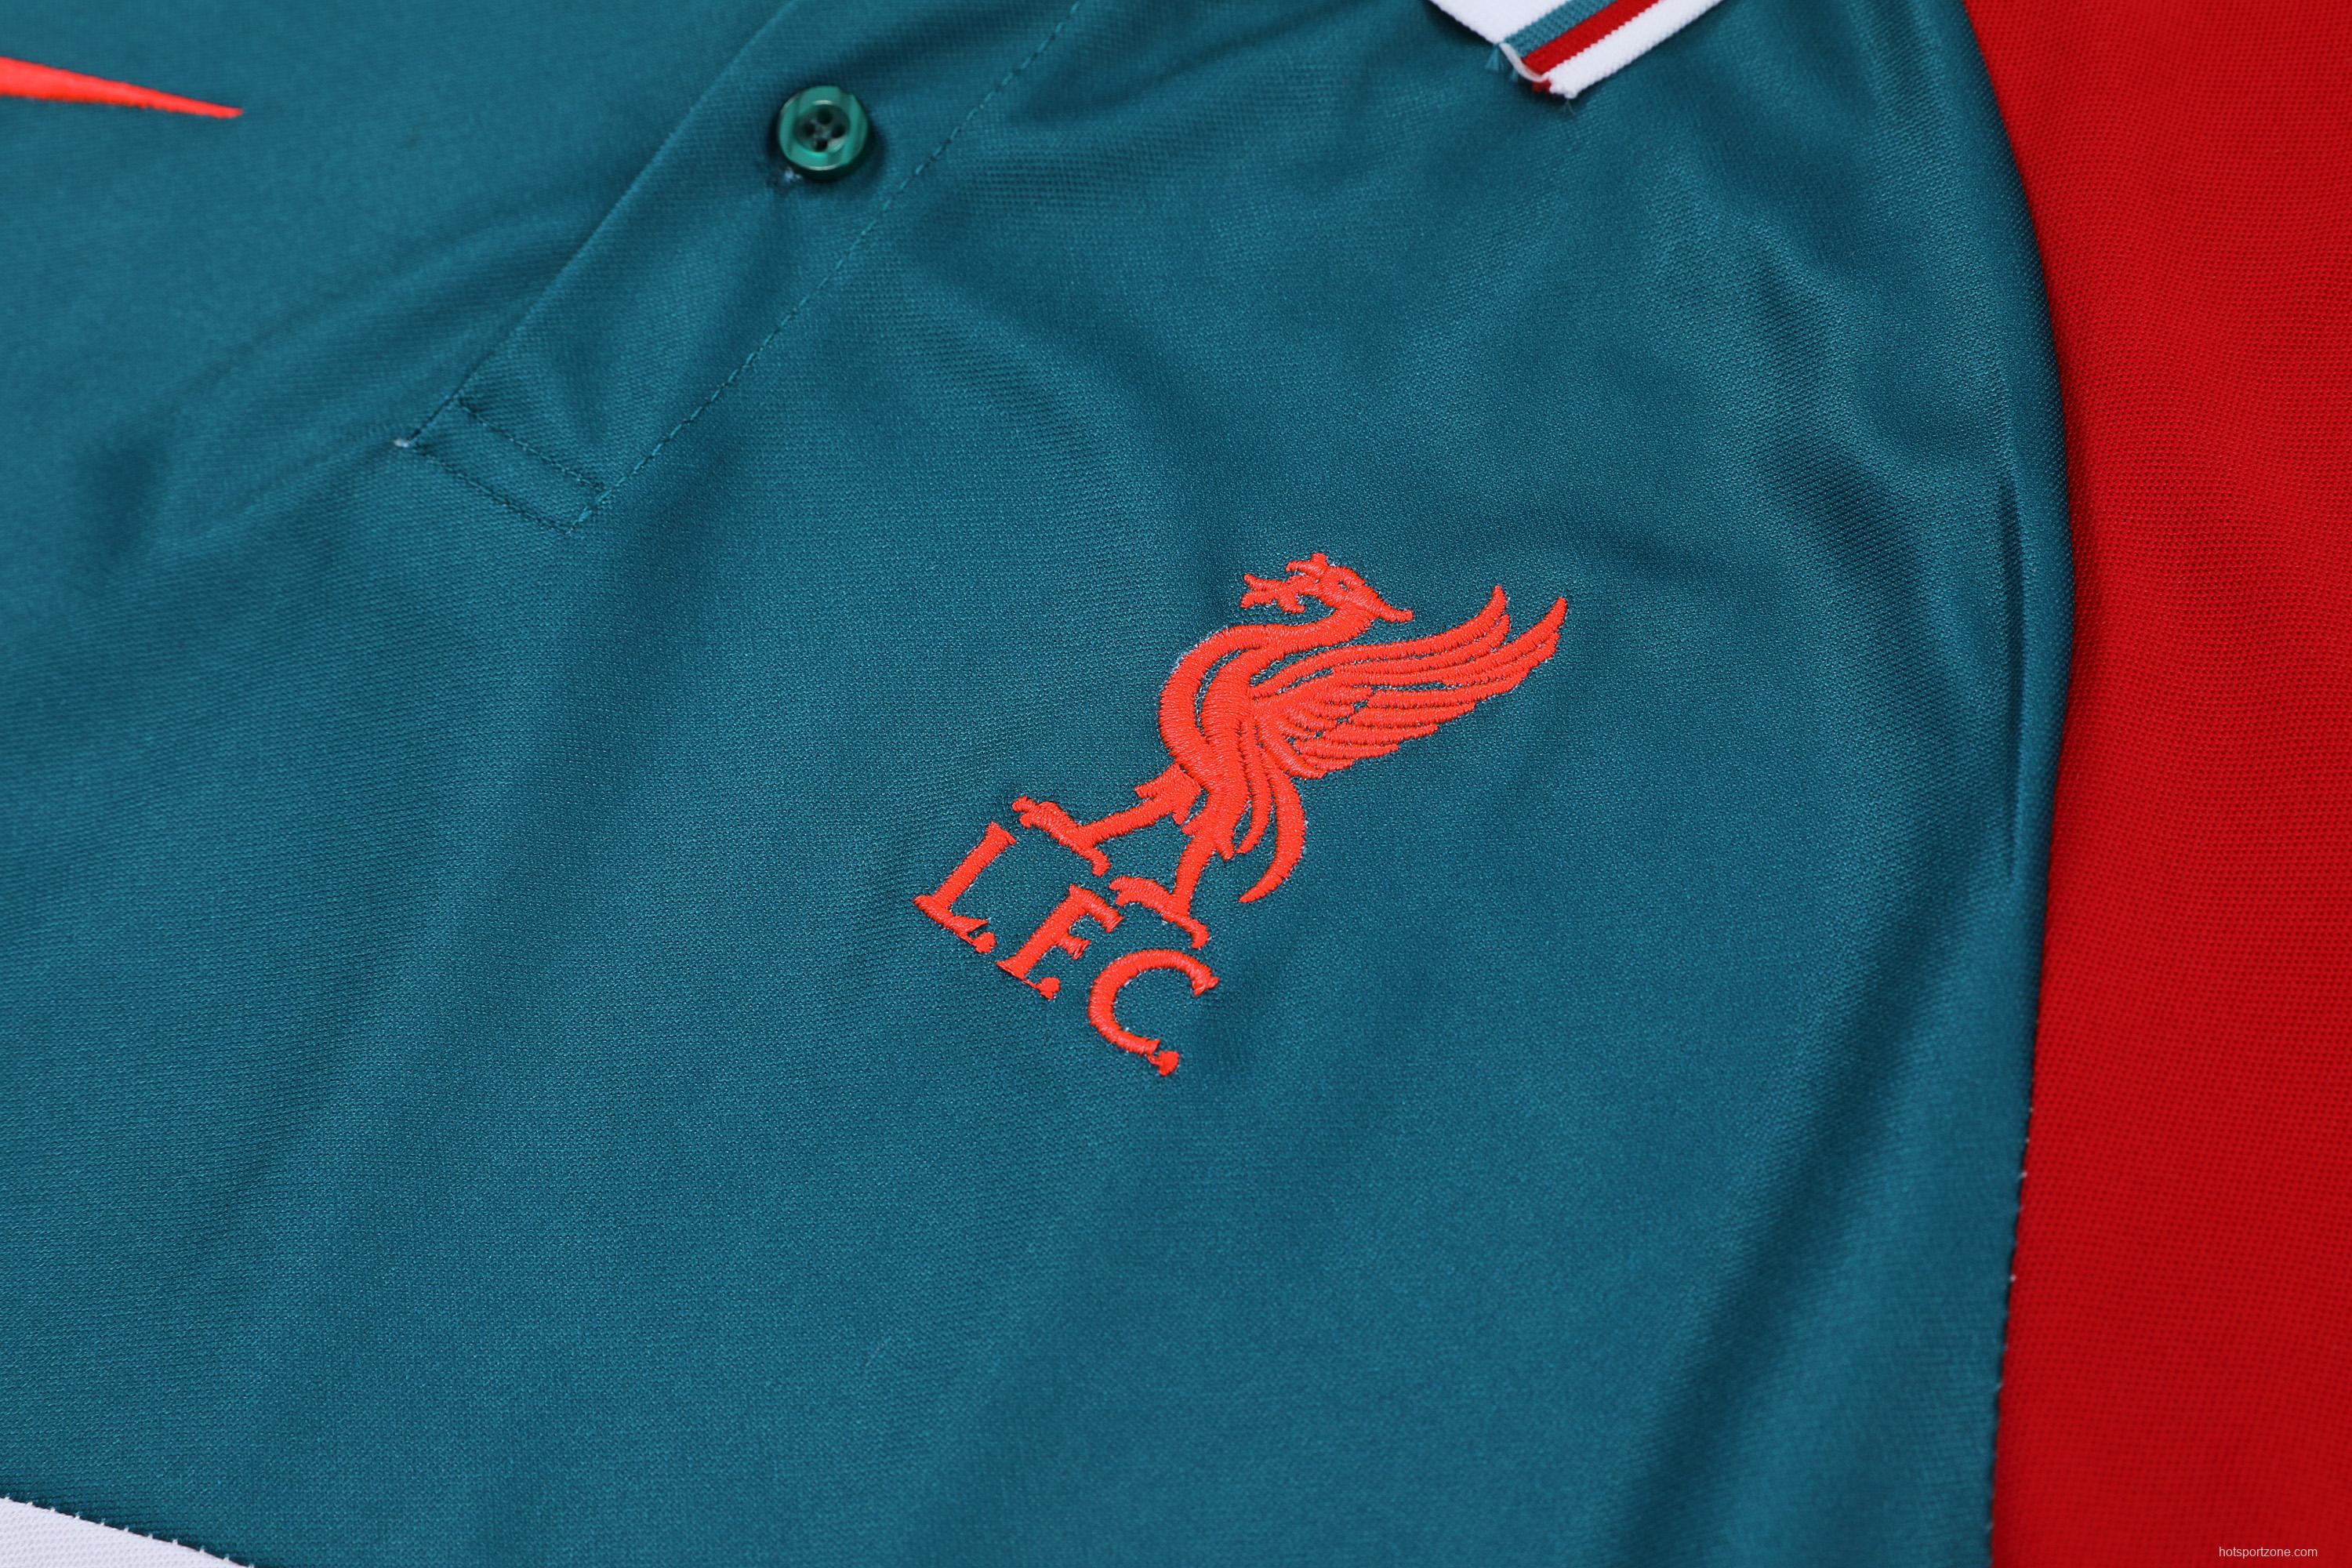 Liverpool POLO kit (does not support separate sale)